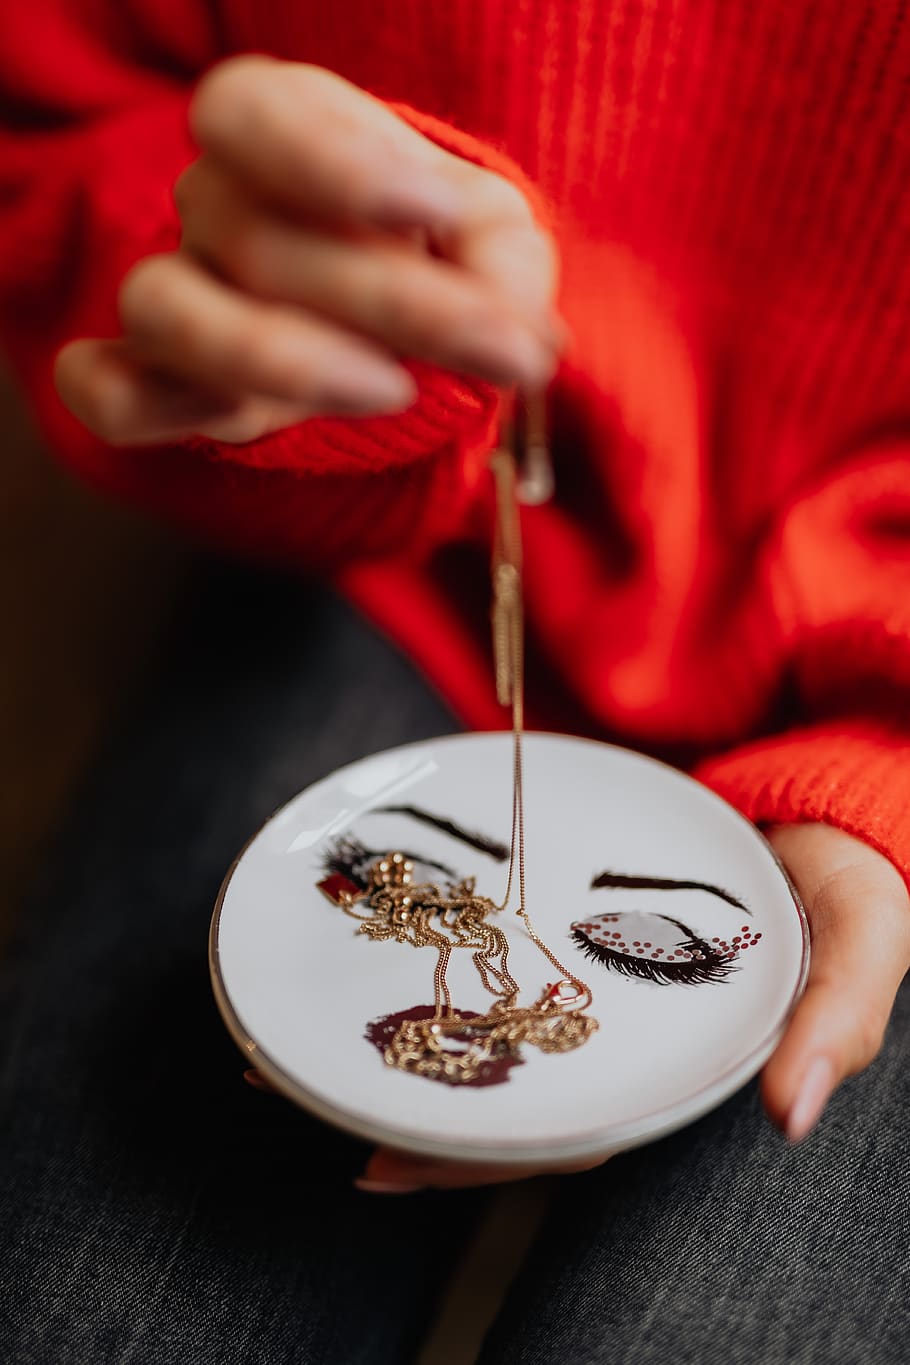 jewelry, jewellery, beauty, gold, red sweater, sweater, Decorative, plate, one person, holding